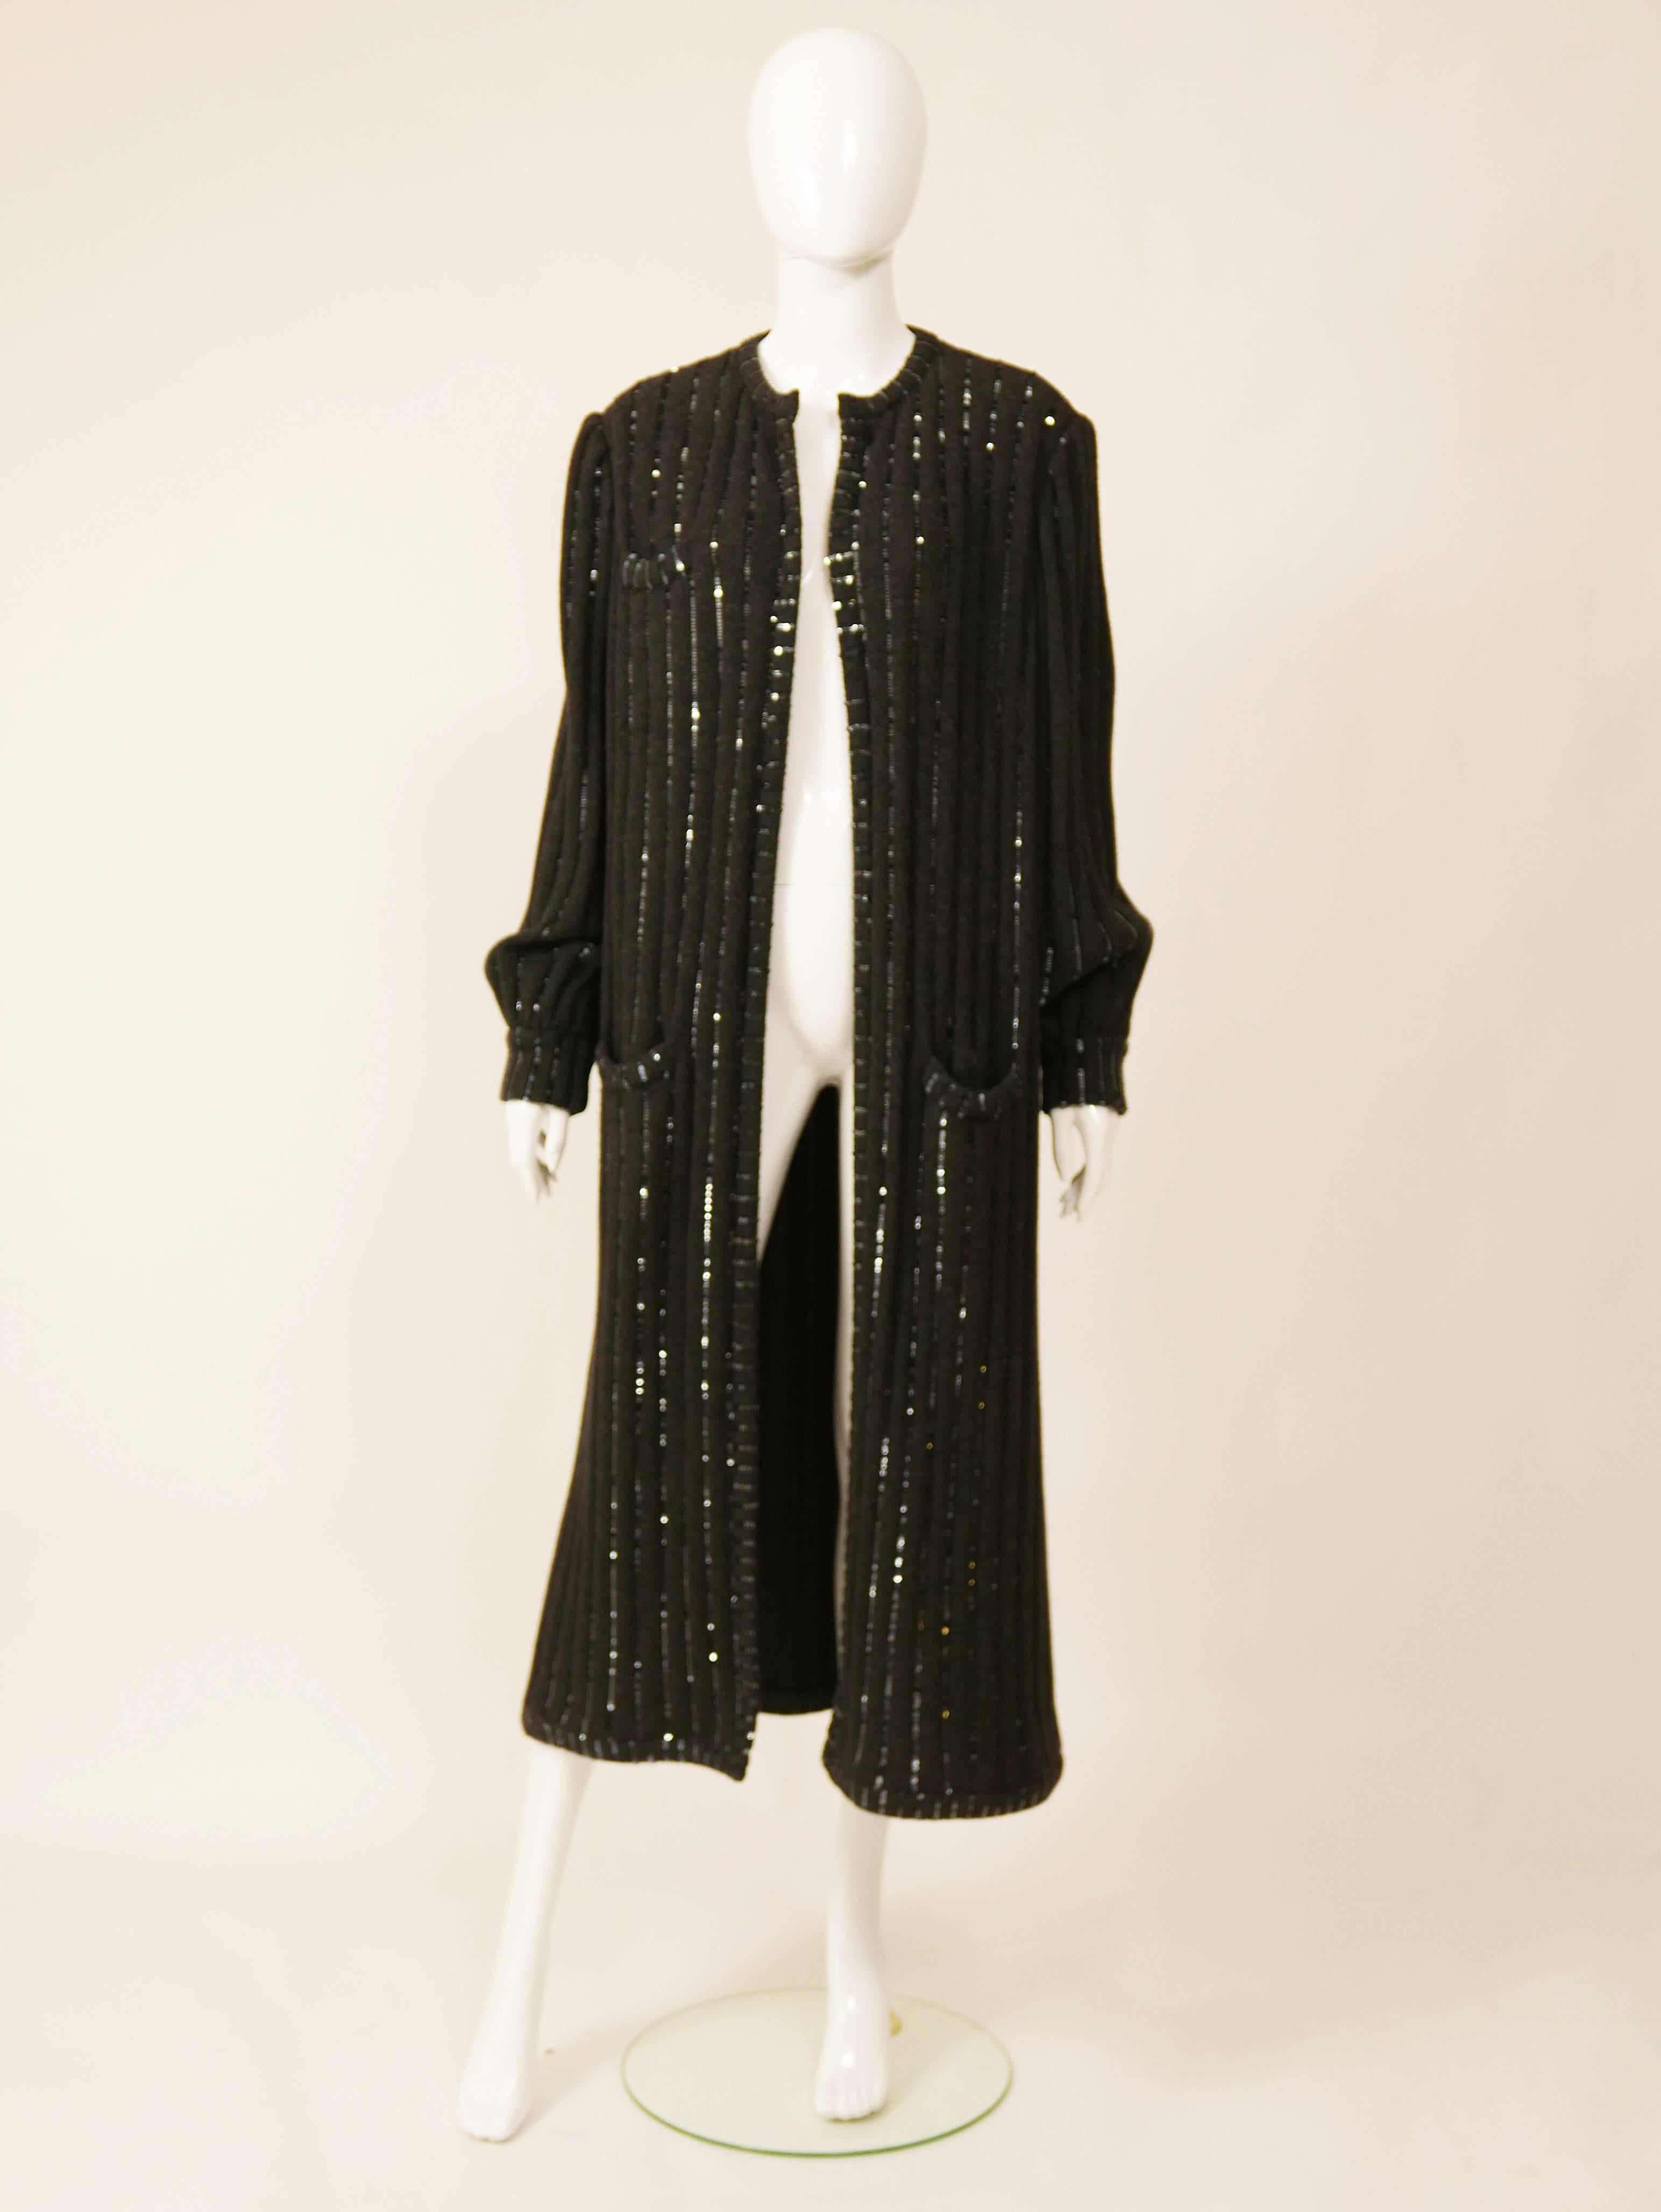 This lovely Valentino long sweater coat is in a black and sequins. It has gorgeous pleateds and three frontal pockets. 

Very good vintage condition

Label: Valentino Boutique 
Fabric: wool
Color: black

Measurement:
Label size L
Estimeted